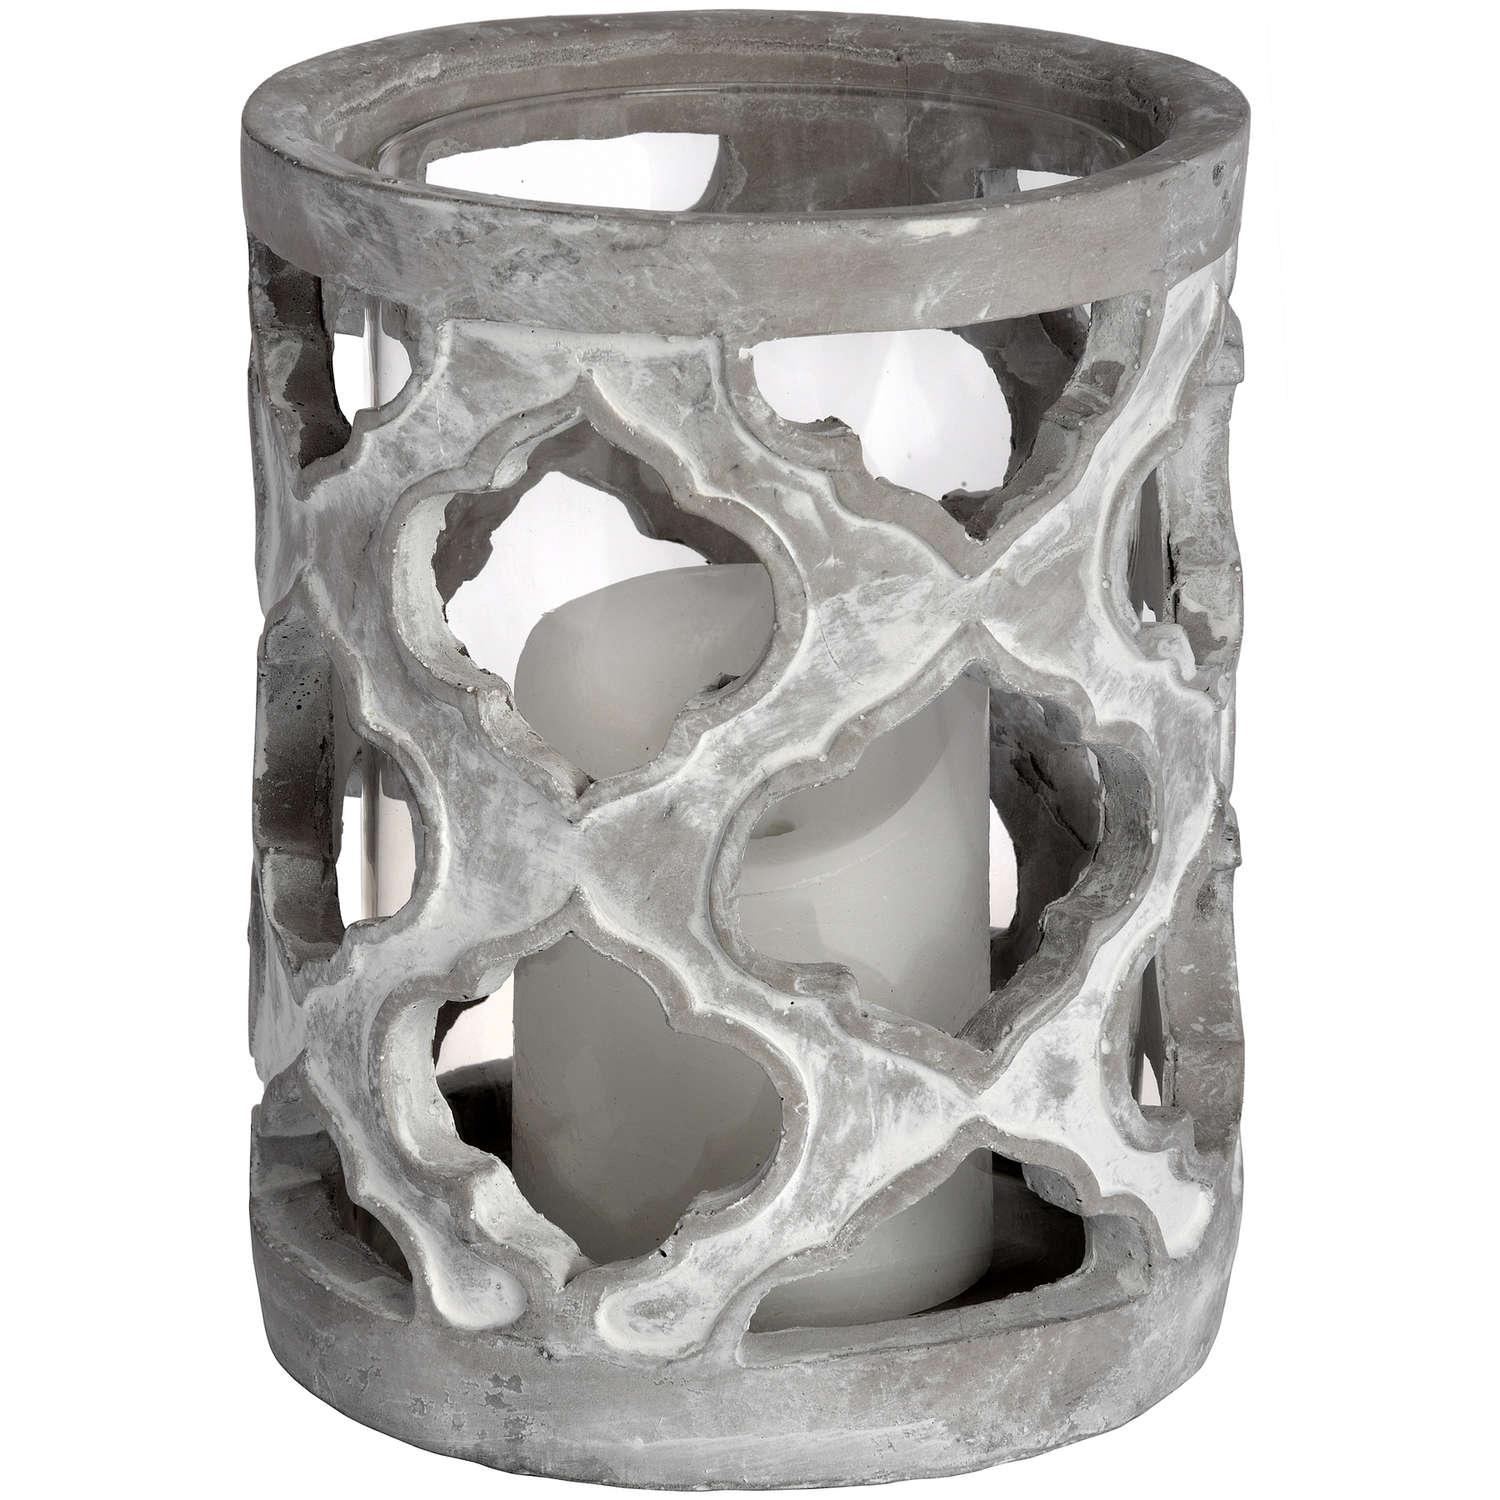 View Small Stone Effect Patterned Candle Holder information